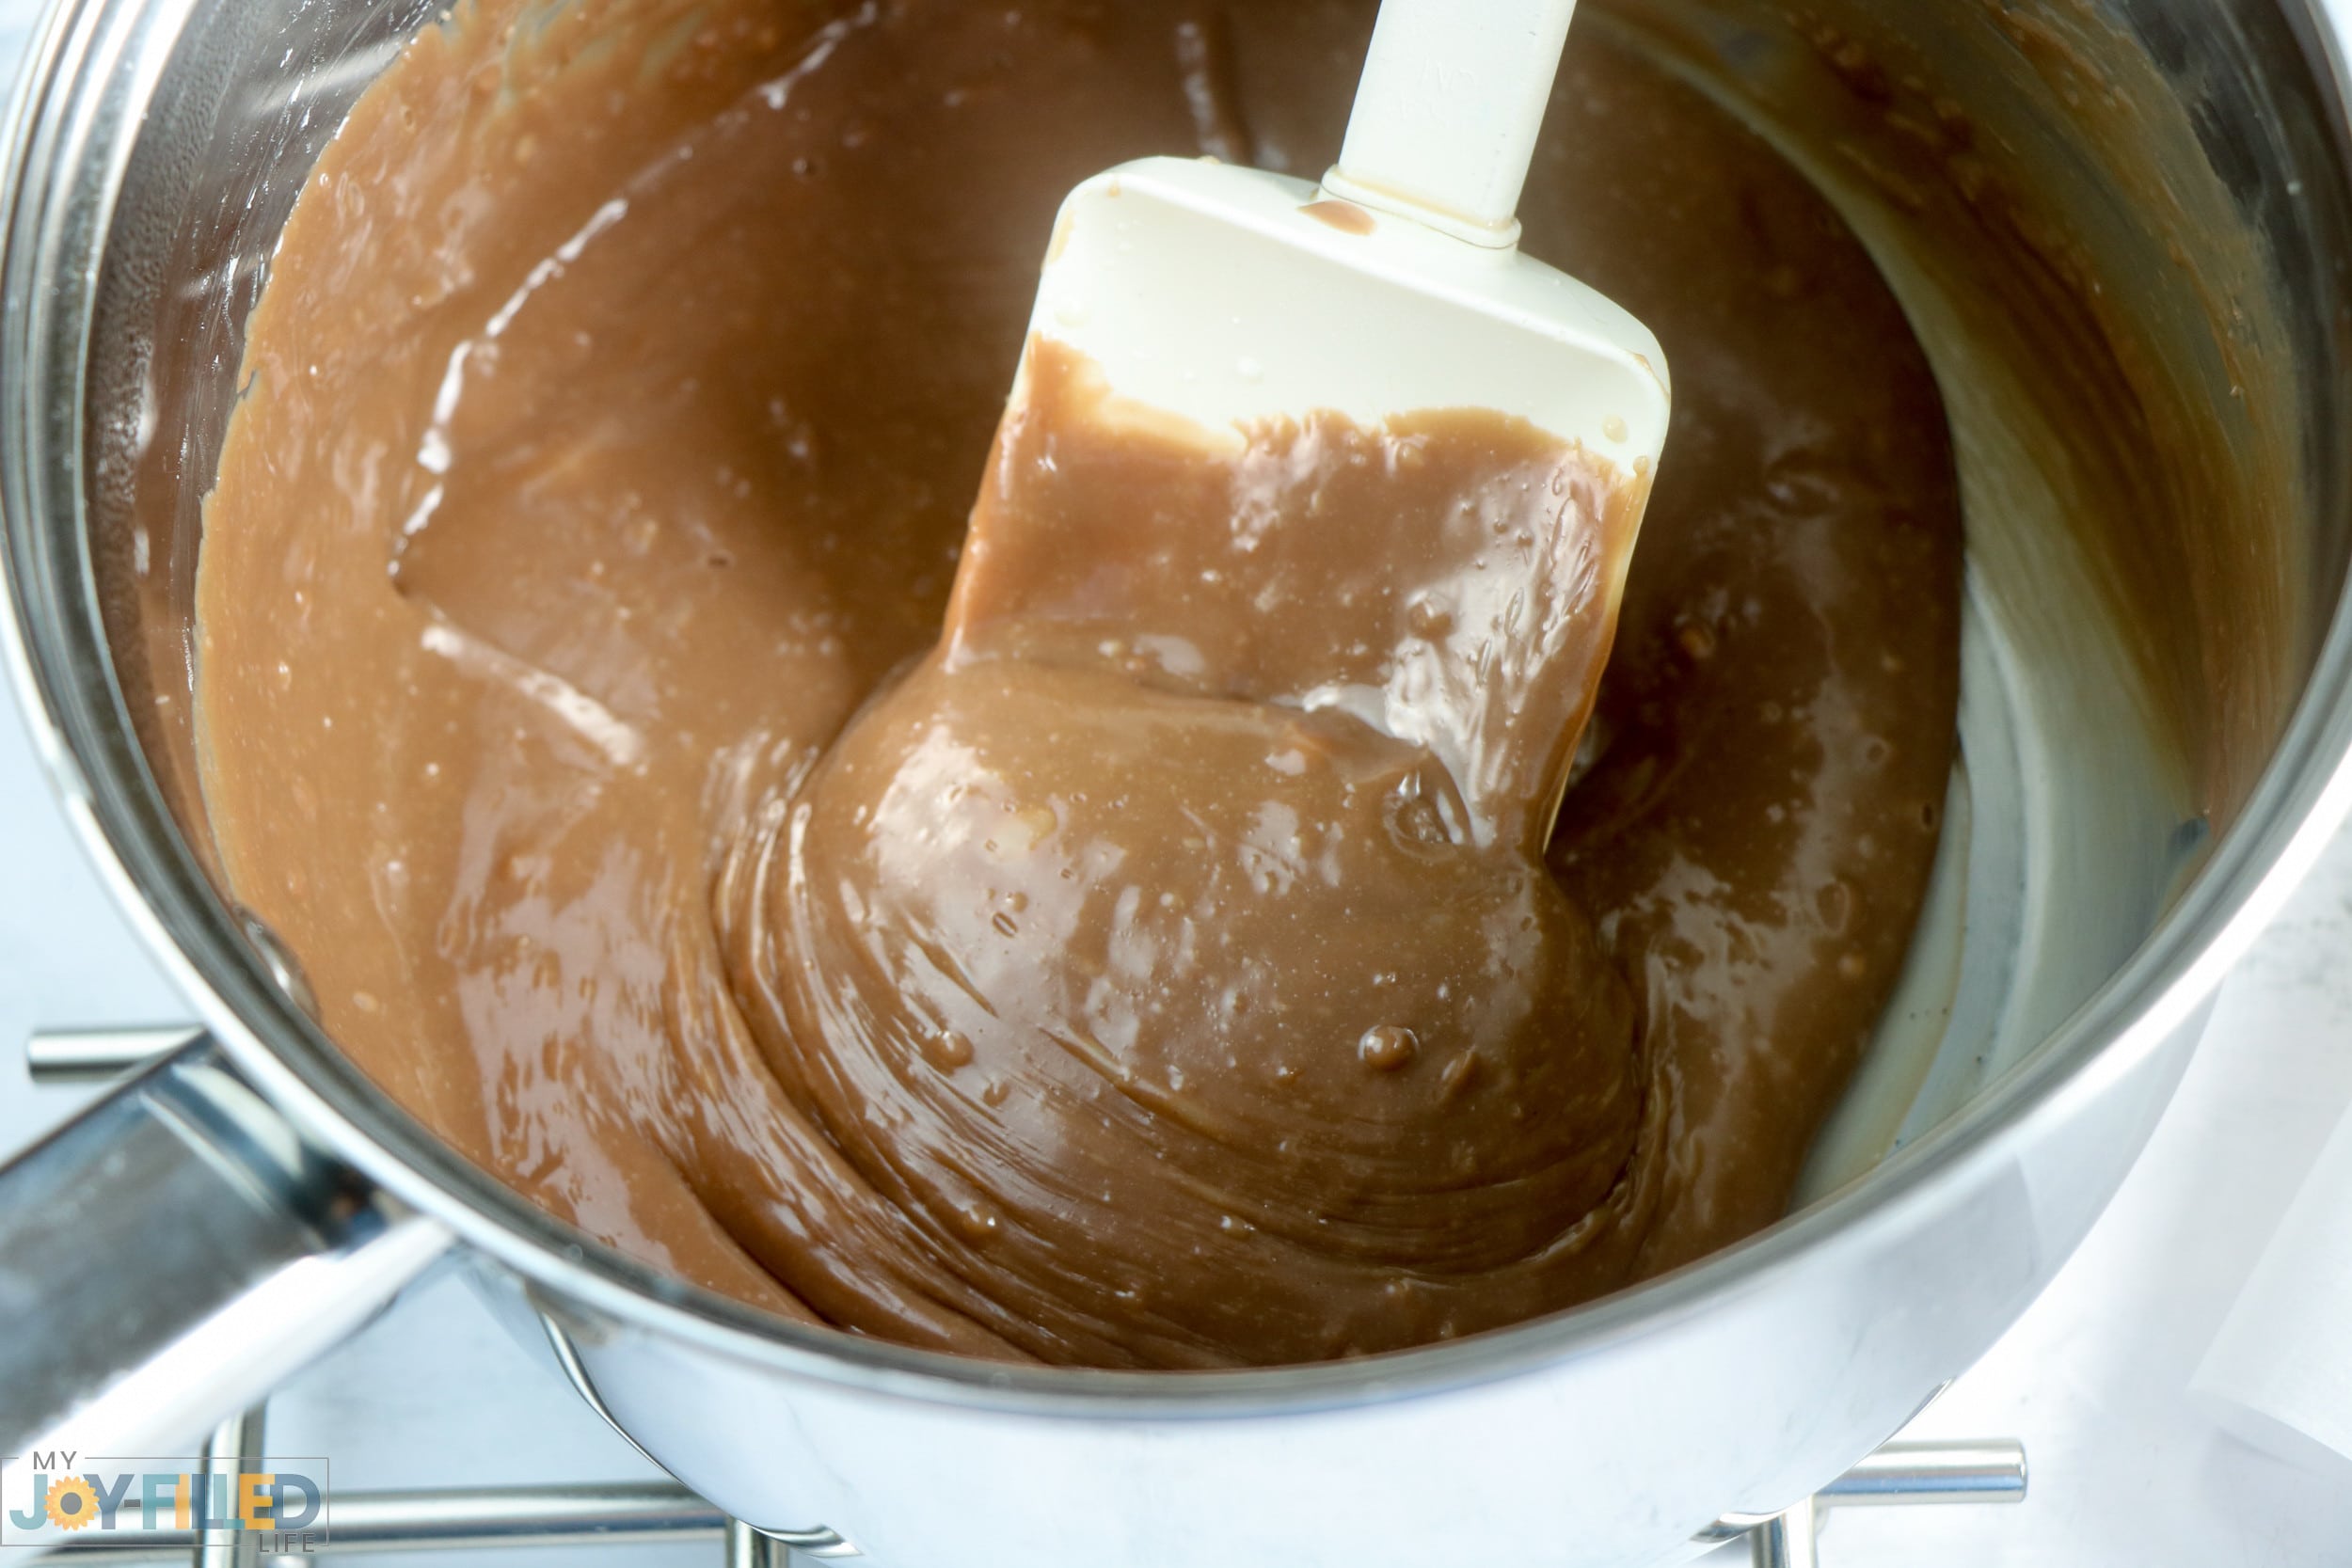 Fully Mixed Edible Chocolate Slime in a Saucepot